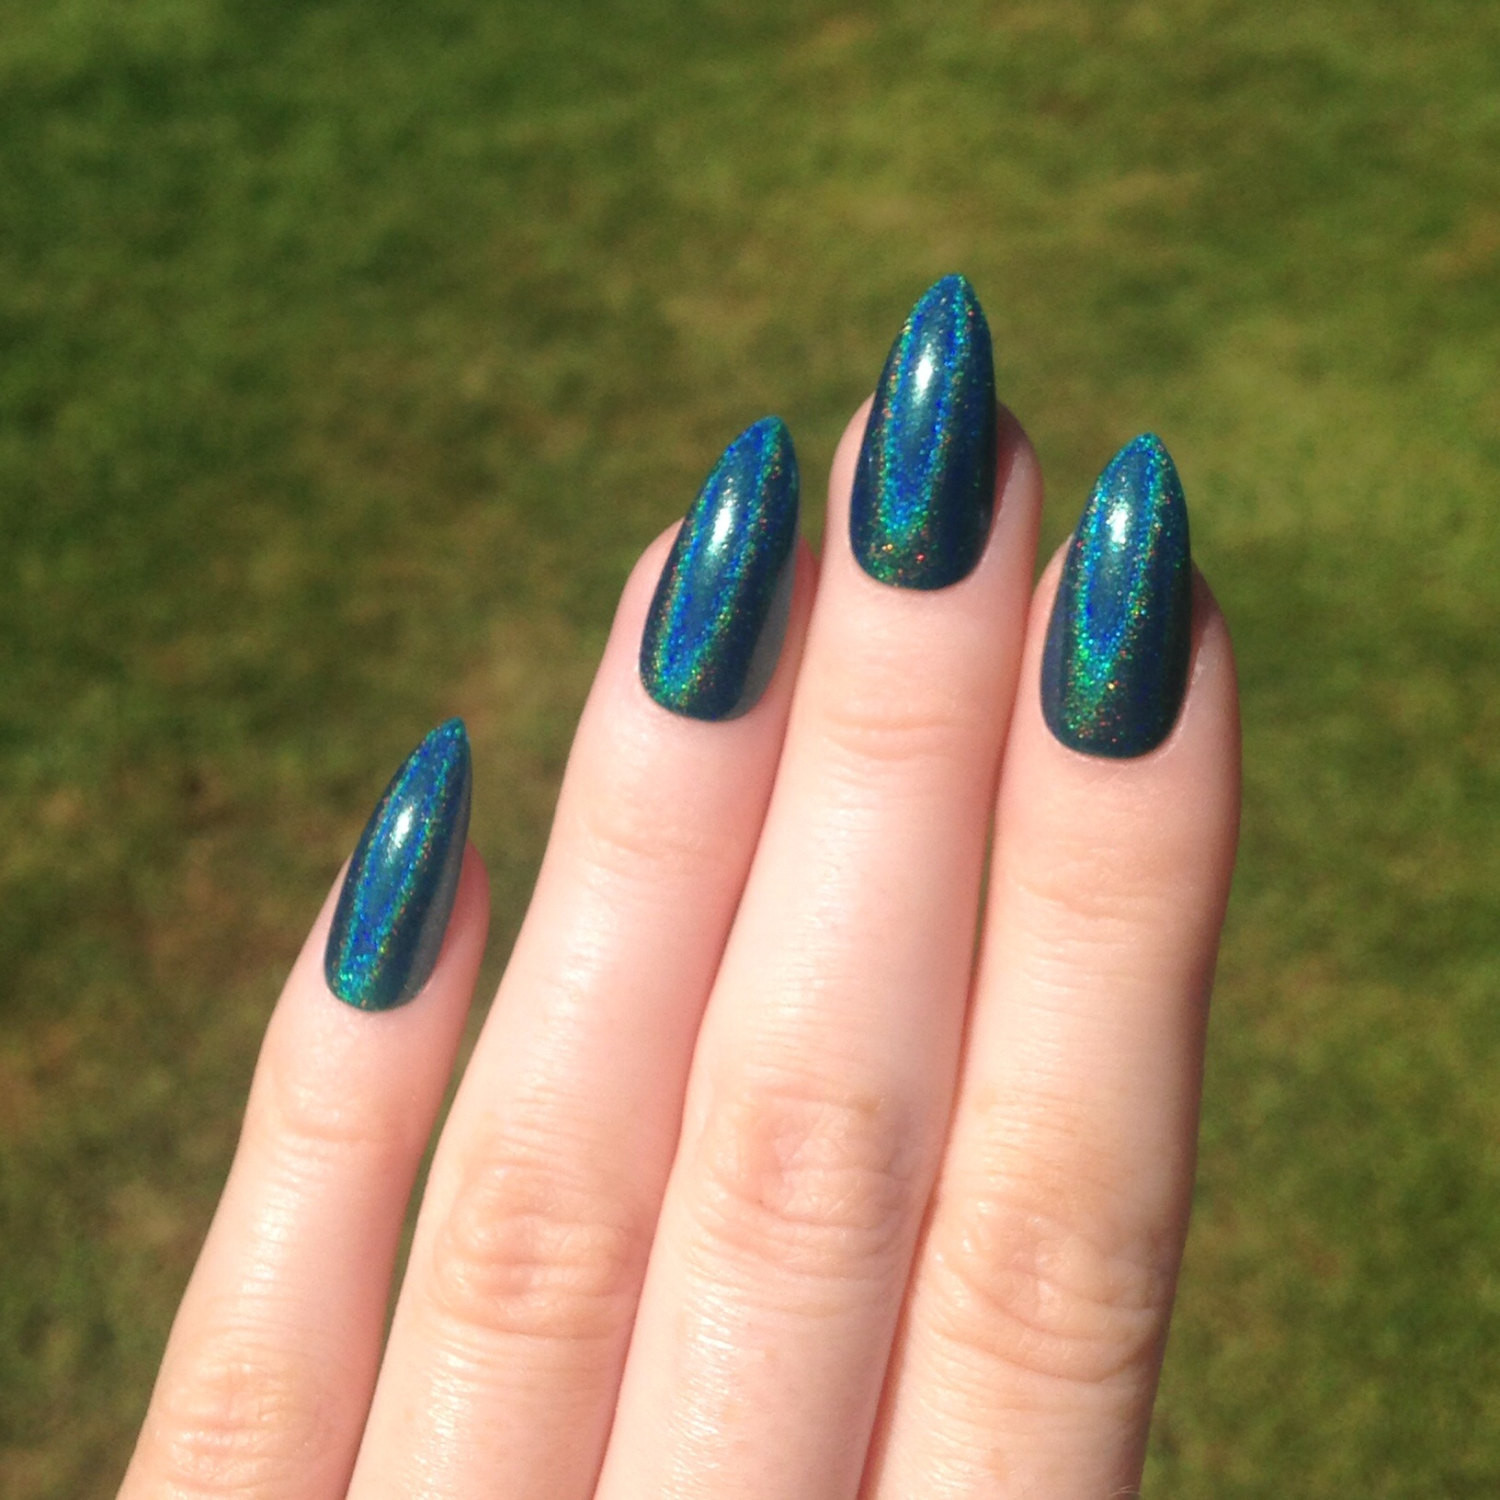 Holographic Nail Art
 Holographic teal stiletto nails Nail designs by